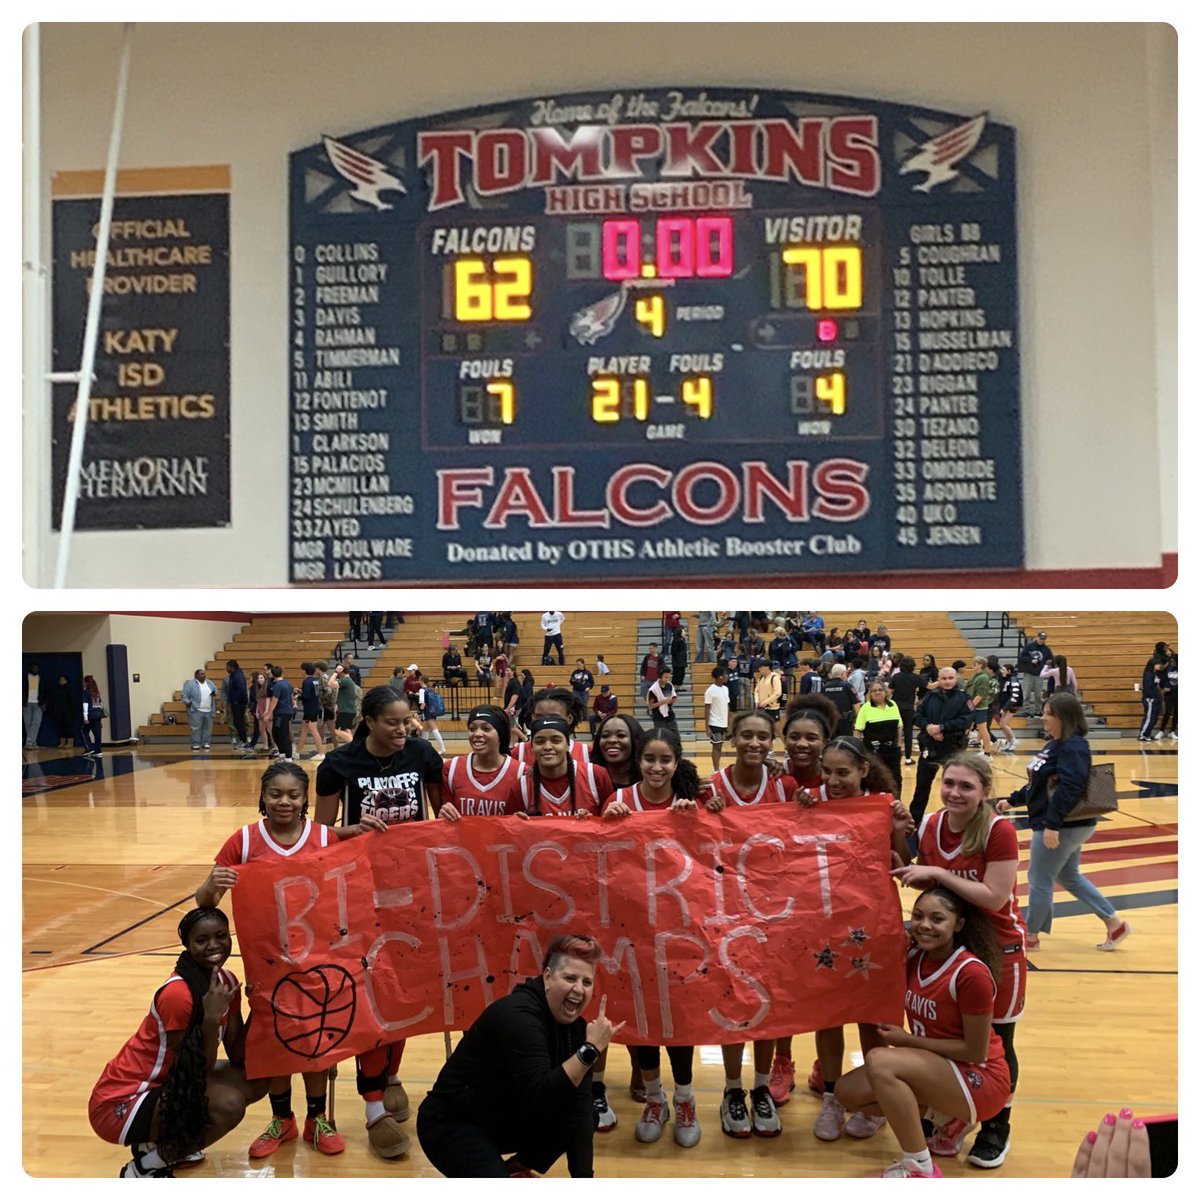 Congratulations are in order for THE LADY TIGERS of TRAVIS HIGH SCHOOL! These young ladies showed up and showed out! They played on quarter at a time and EVERYONE contributed to the FUN! Job well done ladies and coaches! @TigerGirlsBask1 #playoffs #round1 #MissionAccomplished